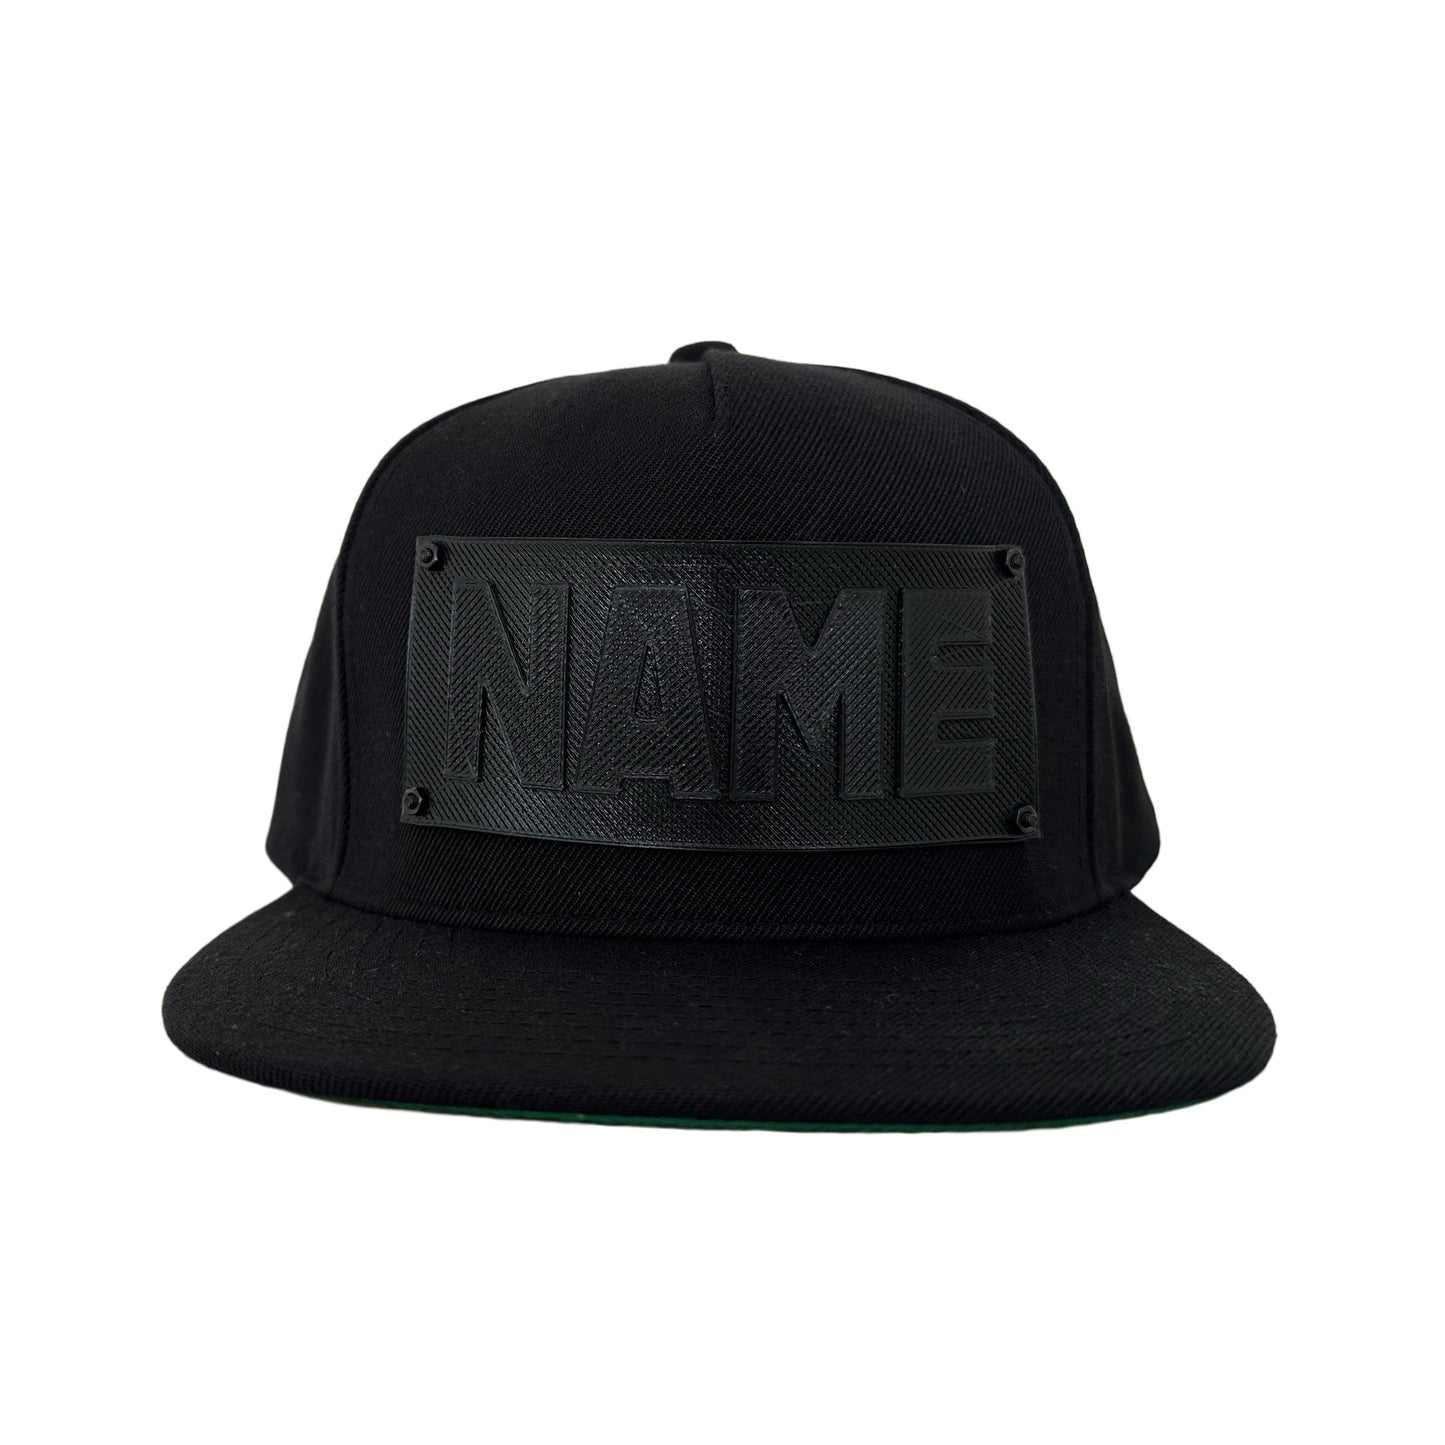 A black snapback baseball hat with a black logo panel that says"NAME".